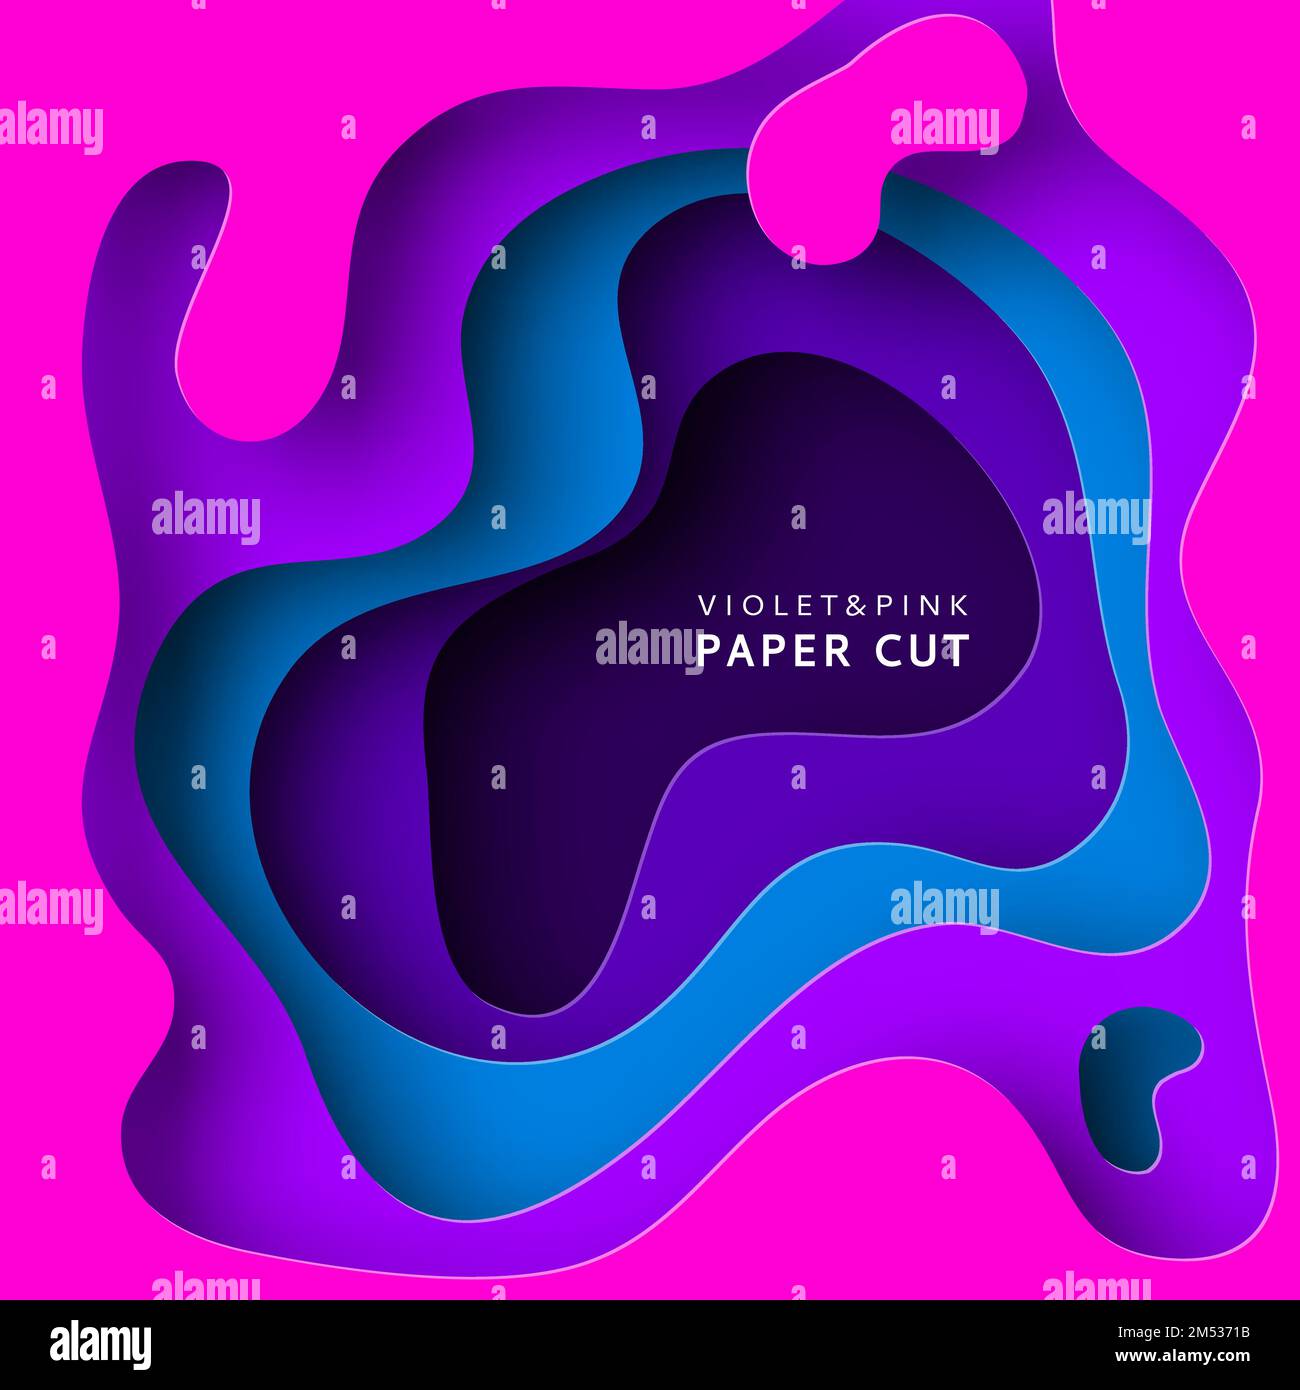 Paper cut vector background. Paper art is violet and blue colors. Square template with paper figures. Bright modern design for poster, flyer, poster, Stock Vector